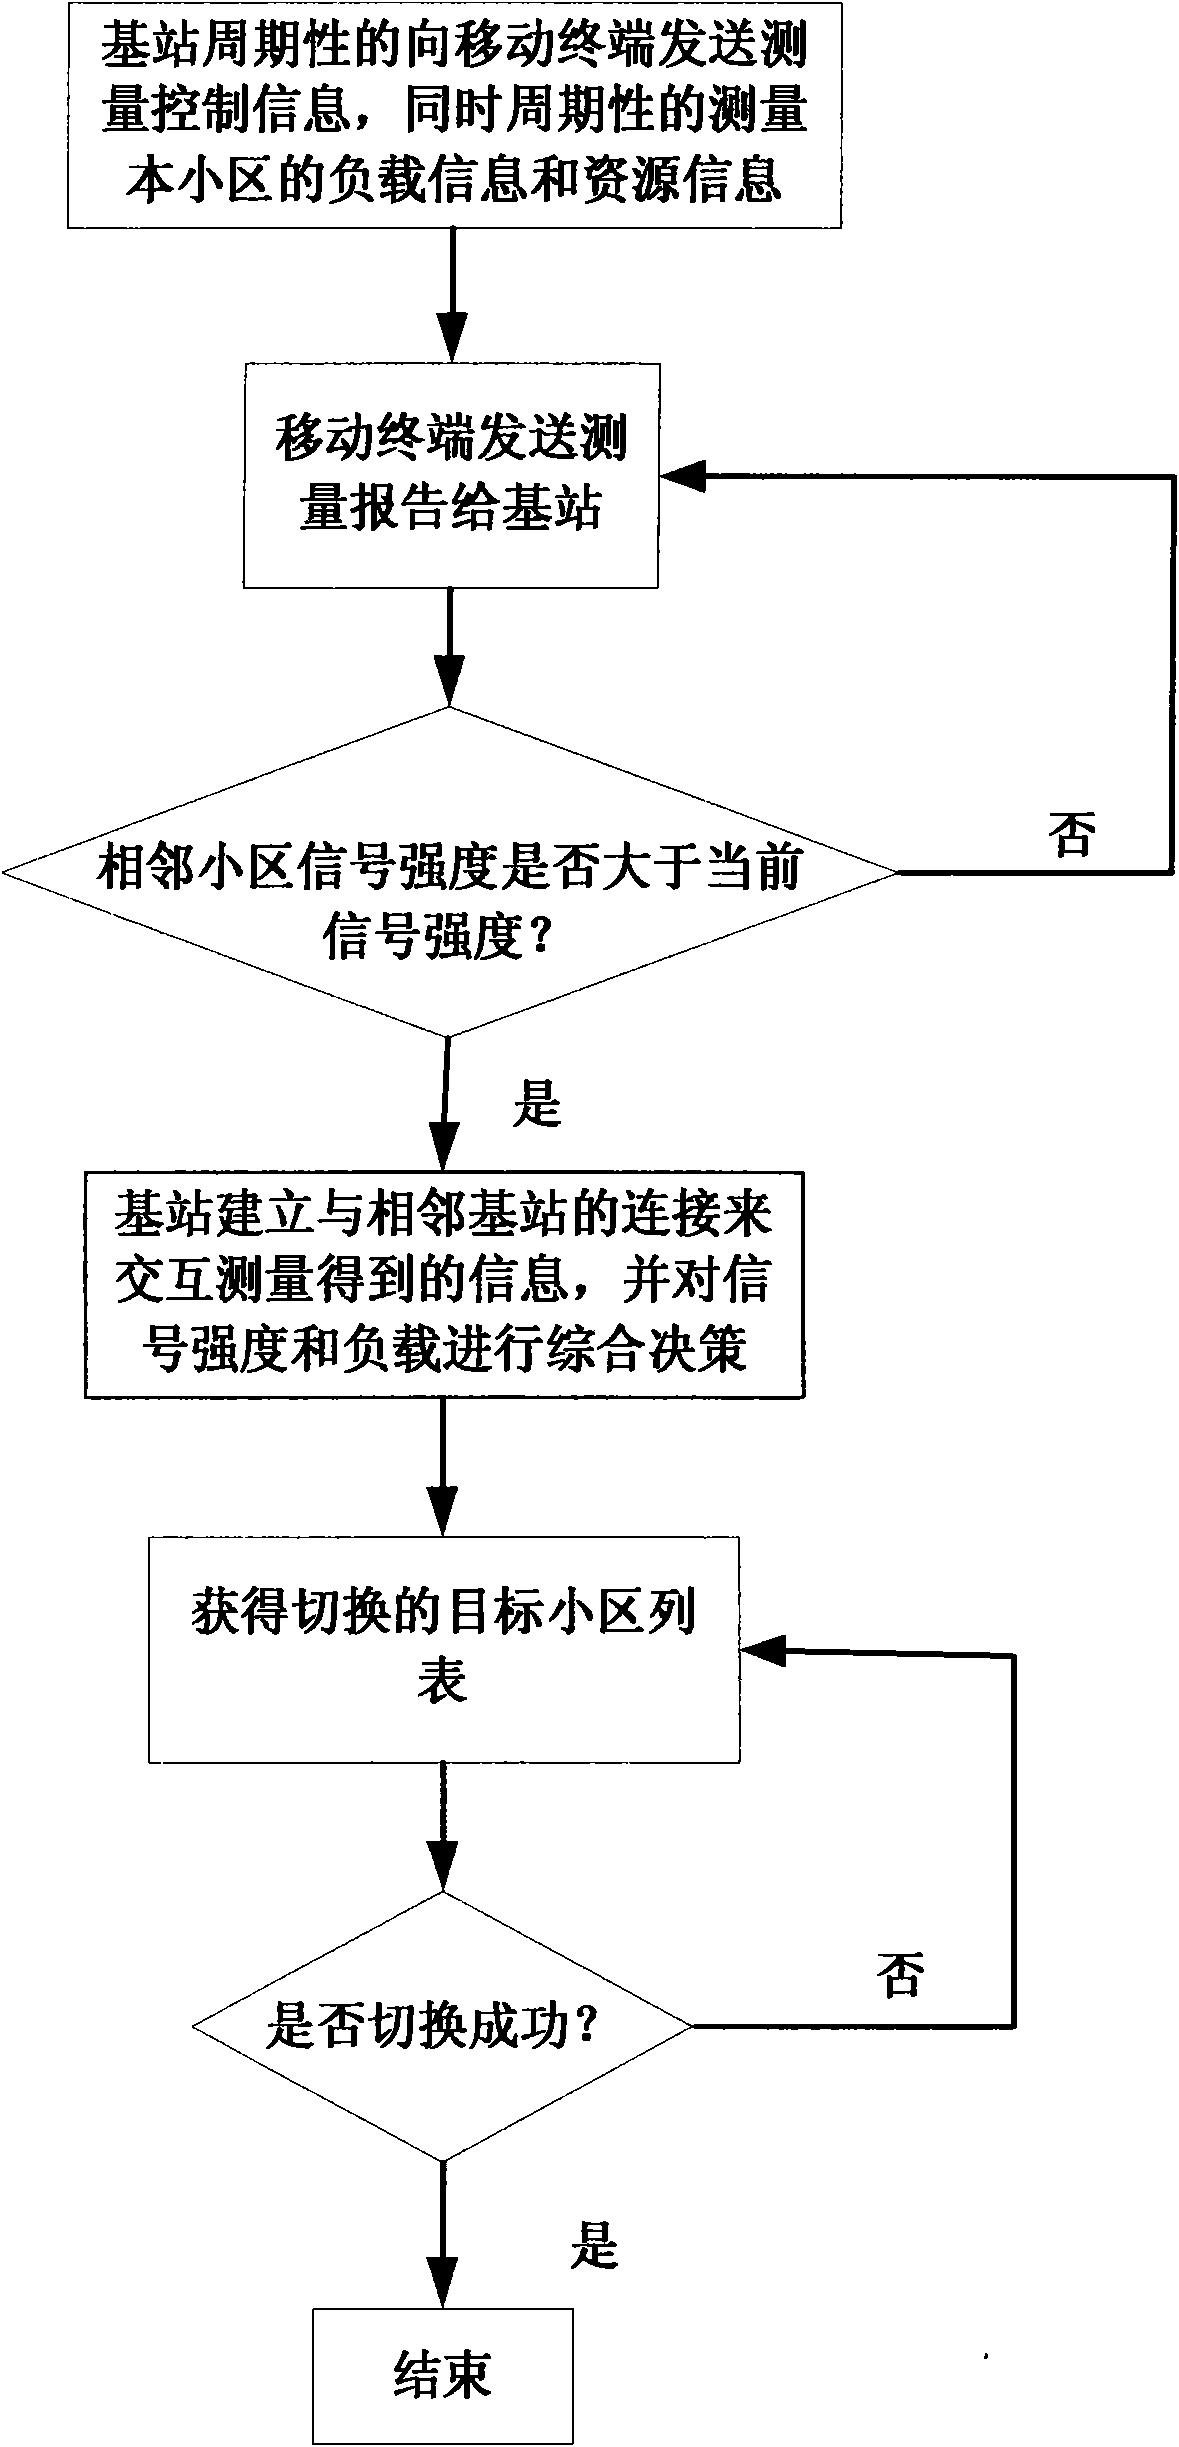 Region switching method based on signal intensity and load estimation